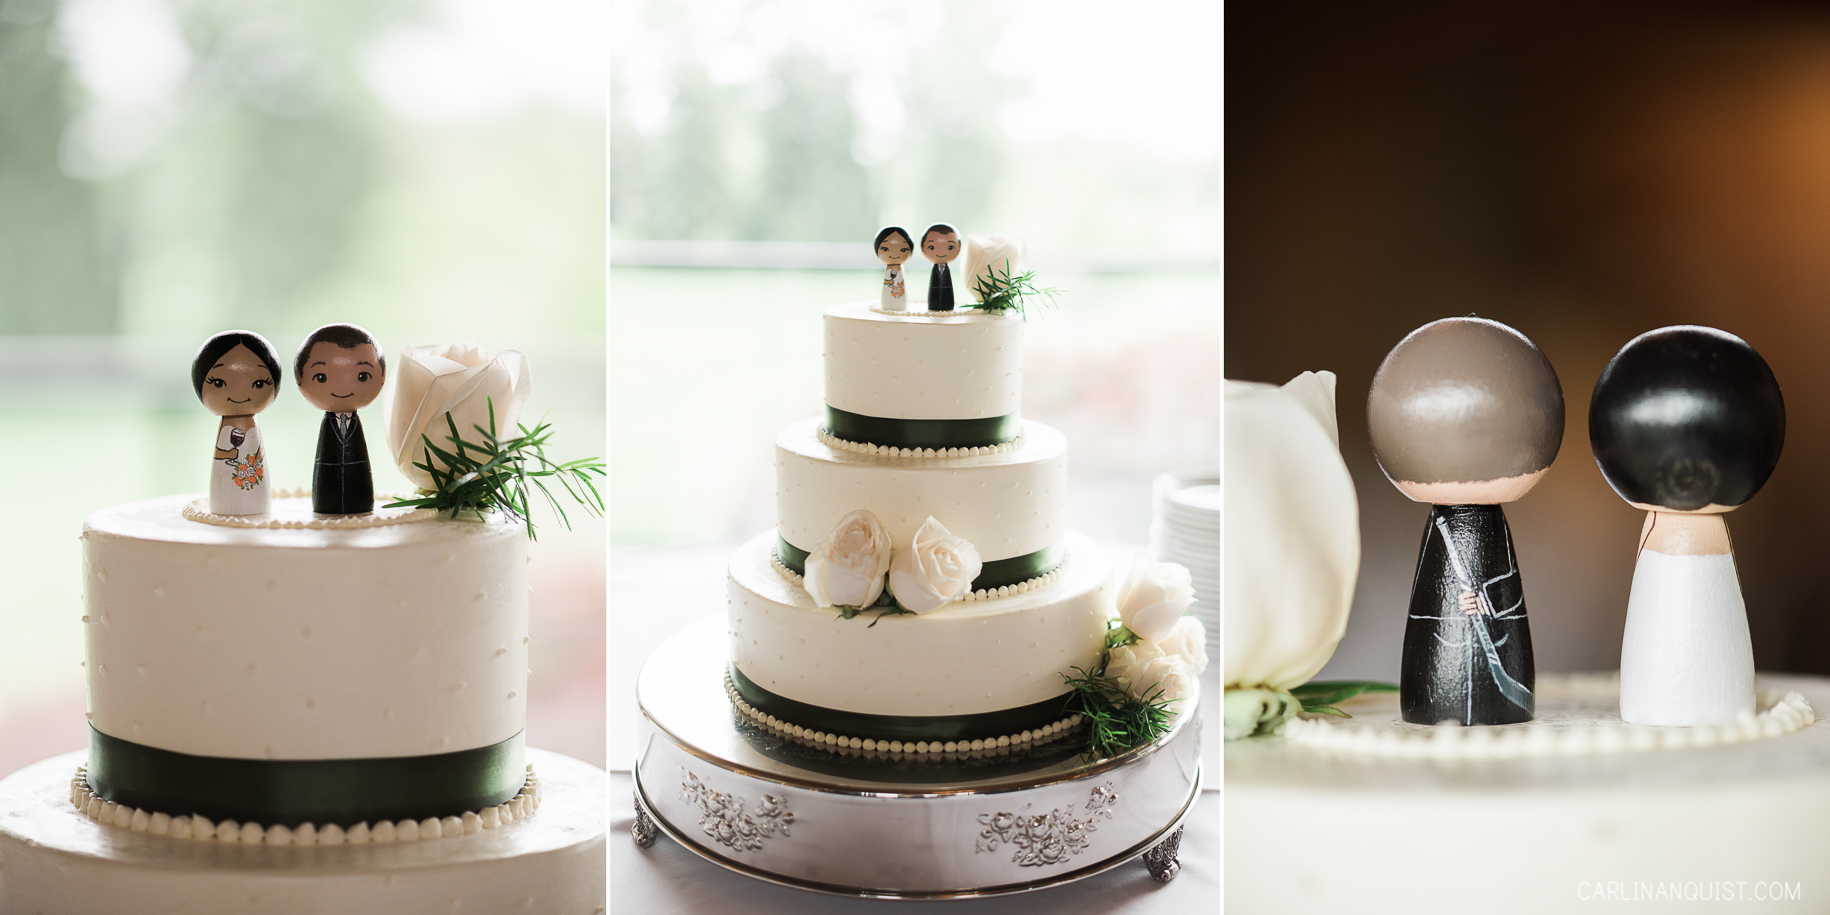 Cake by Decadent Desserts | Cake Topper by licoricewits on Etsy |Earl Grey Golf Club Wedding Photographer